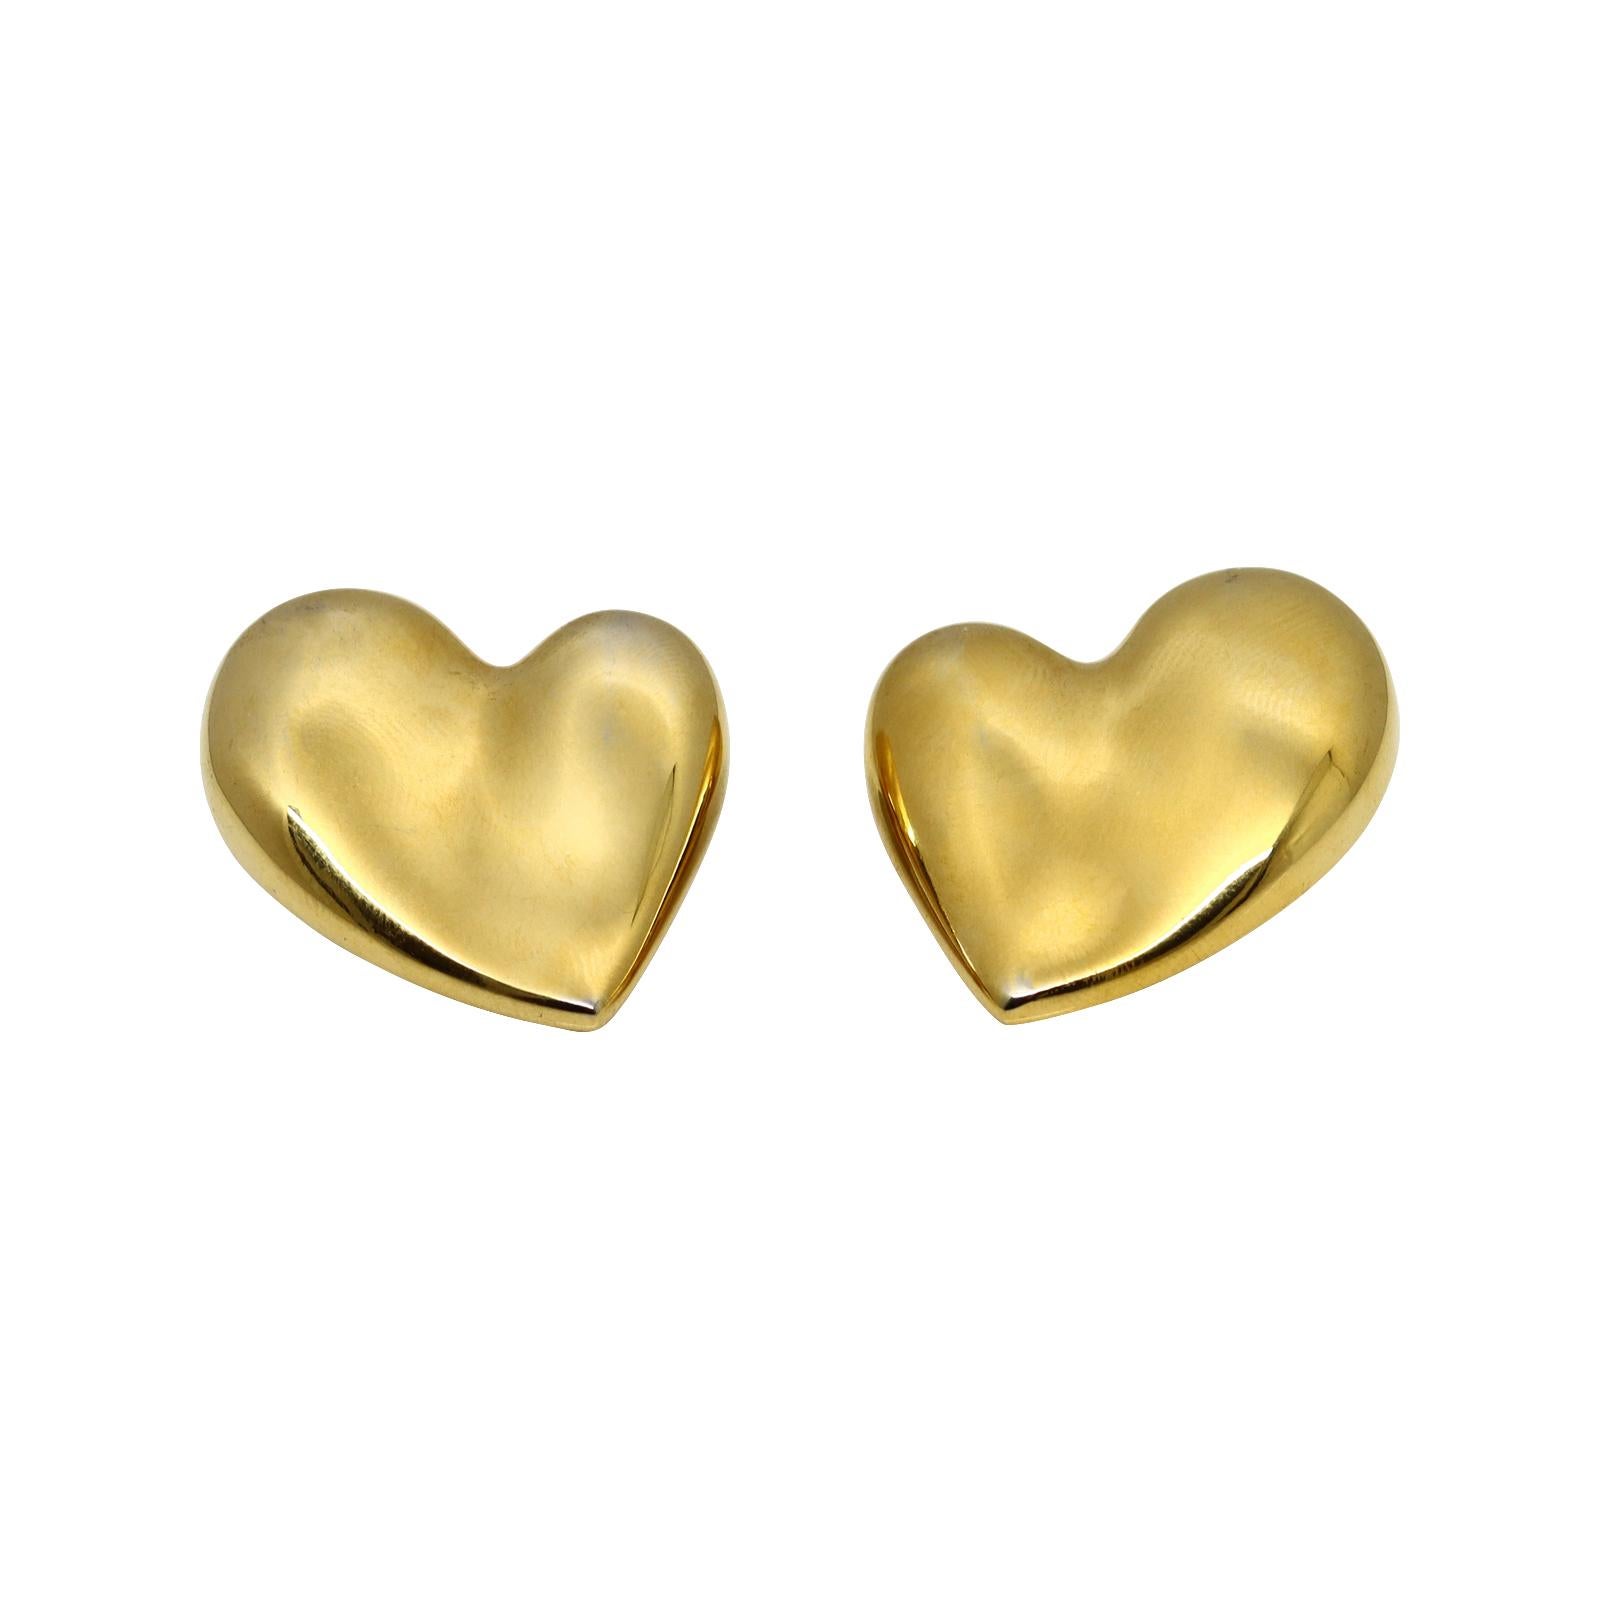 Modern Vintage Carolee Gold Tone Heart Earrings, circa 2000s For Sale